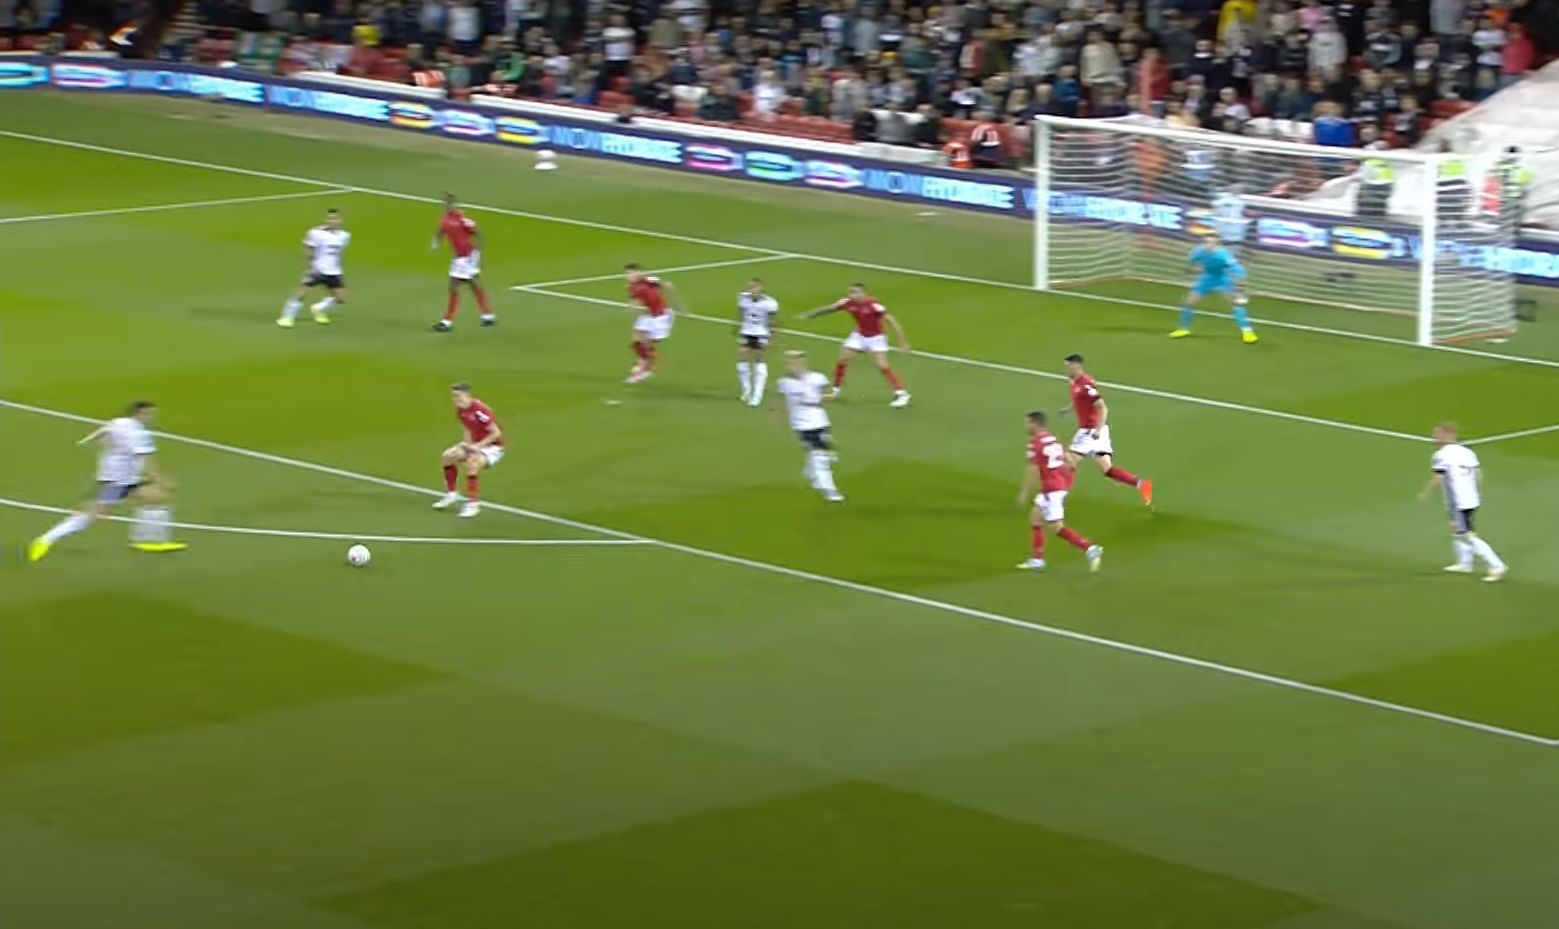 Video: Palhinha hits a beauty in Fulham’s 3-2 win over Nottingham Forest